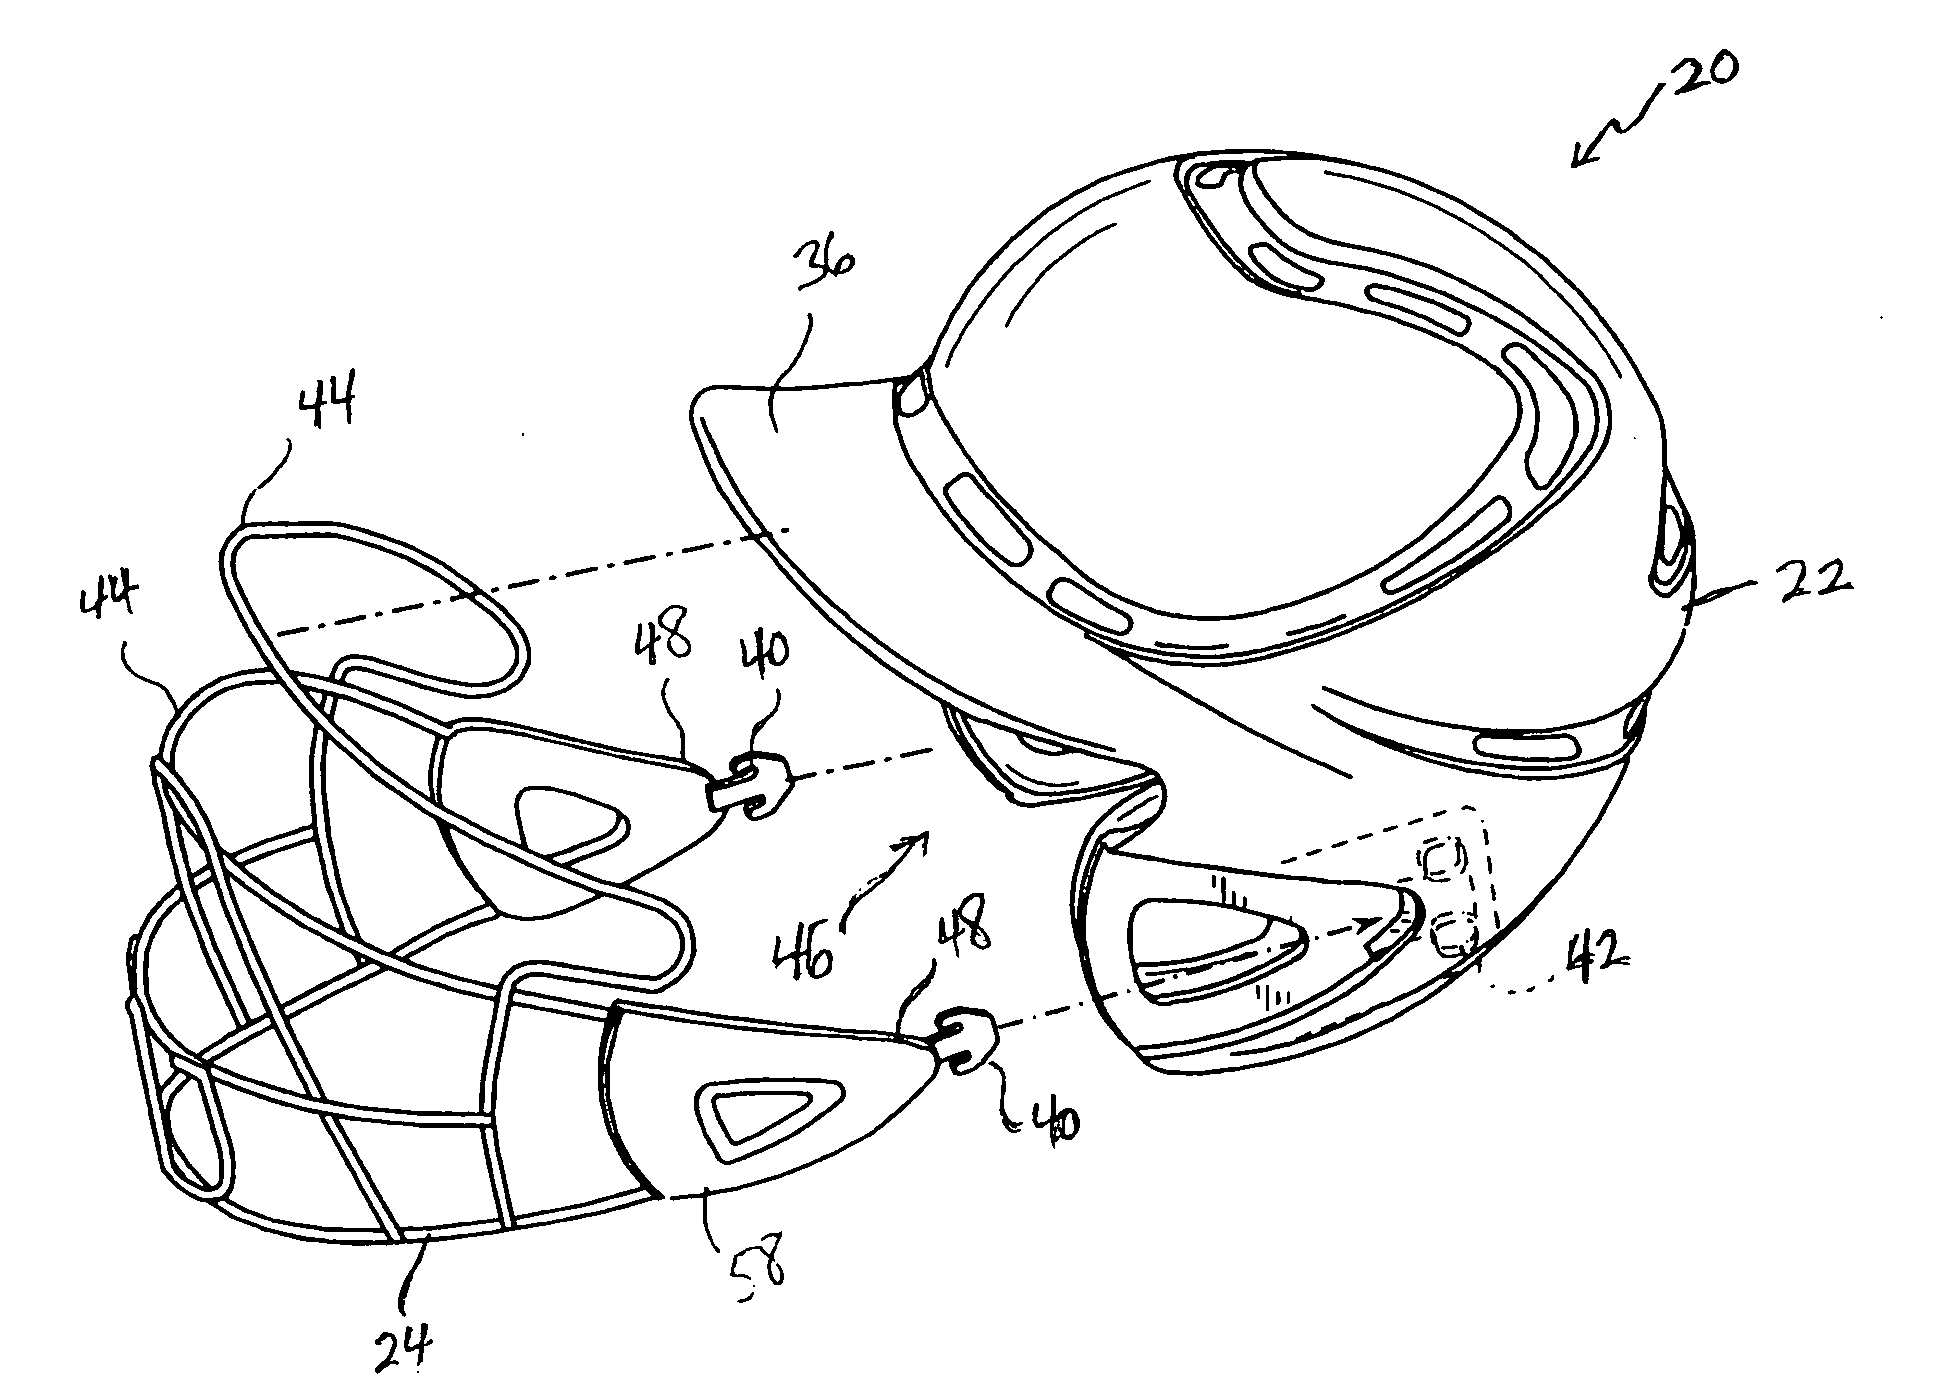 Sports helmet with removable facemask